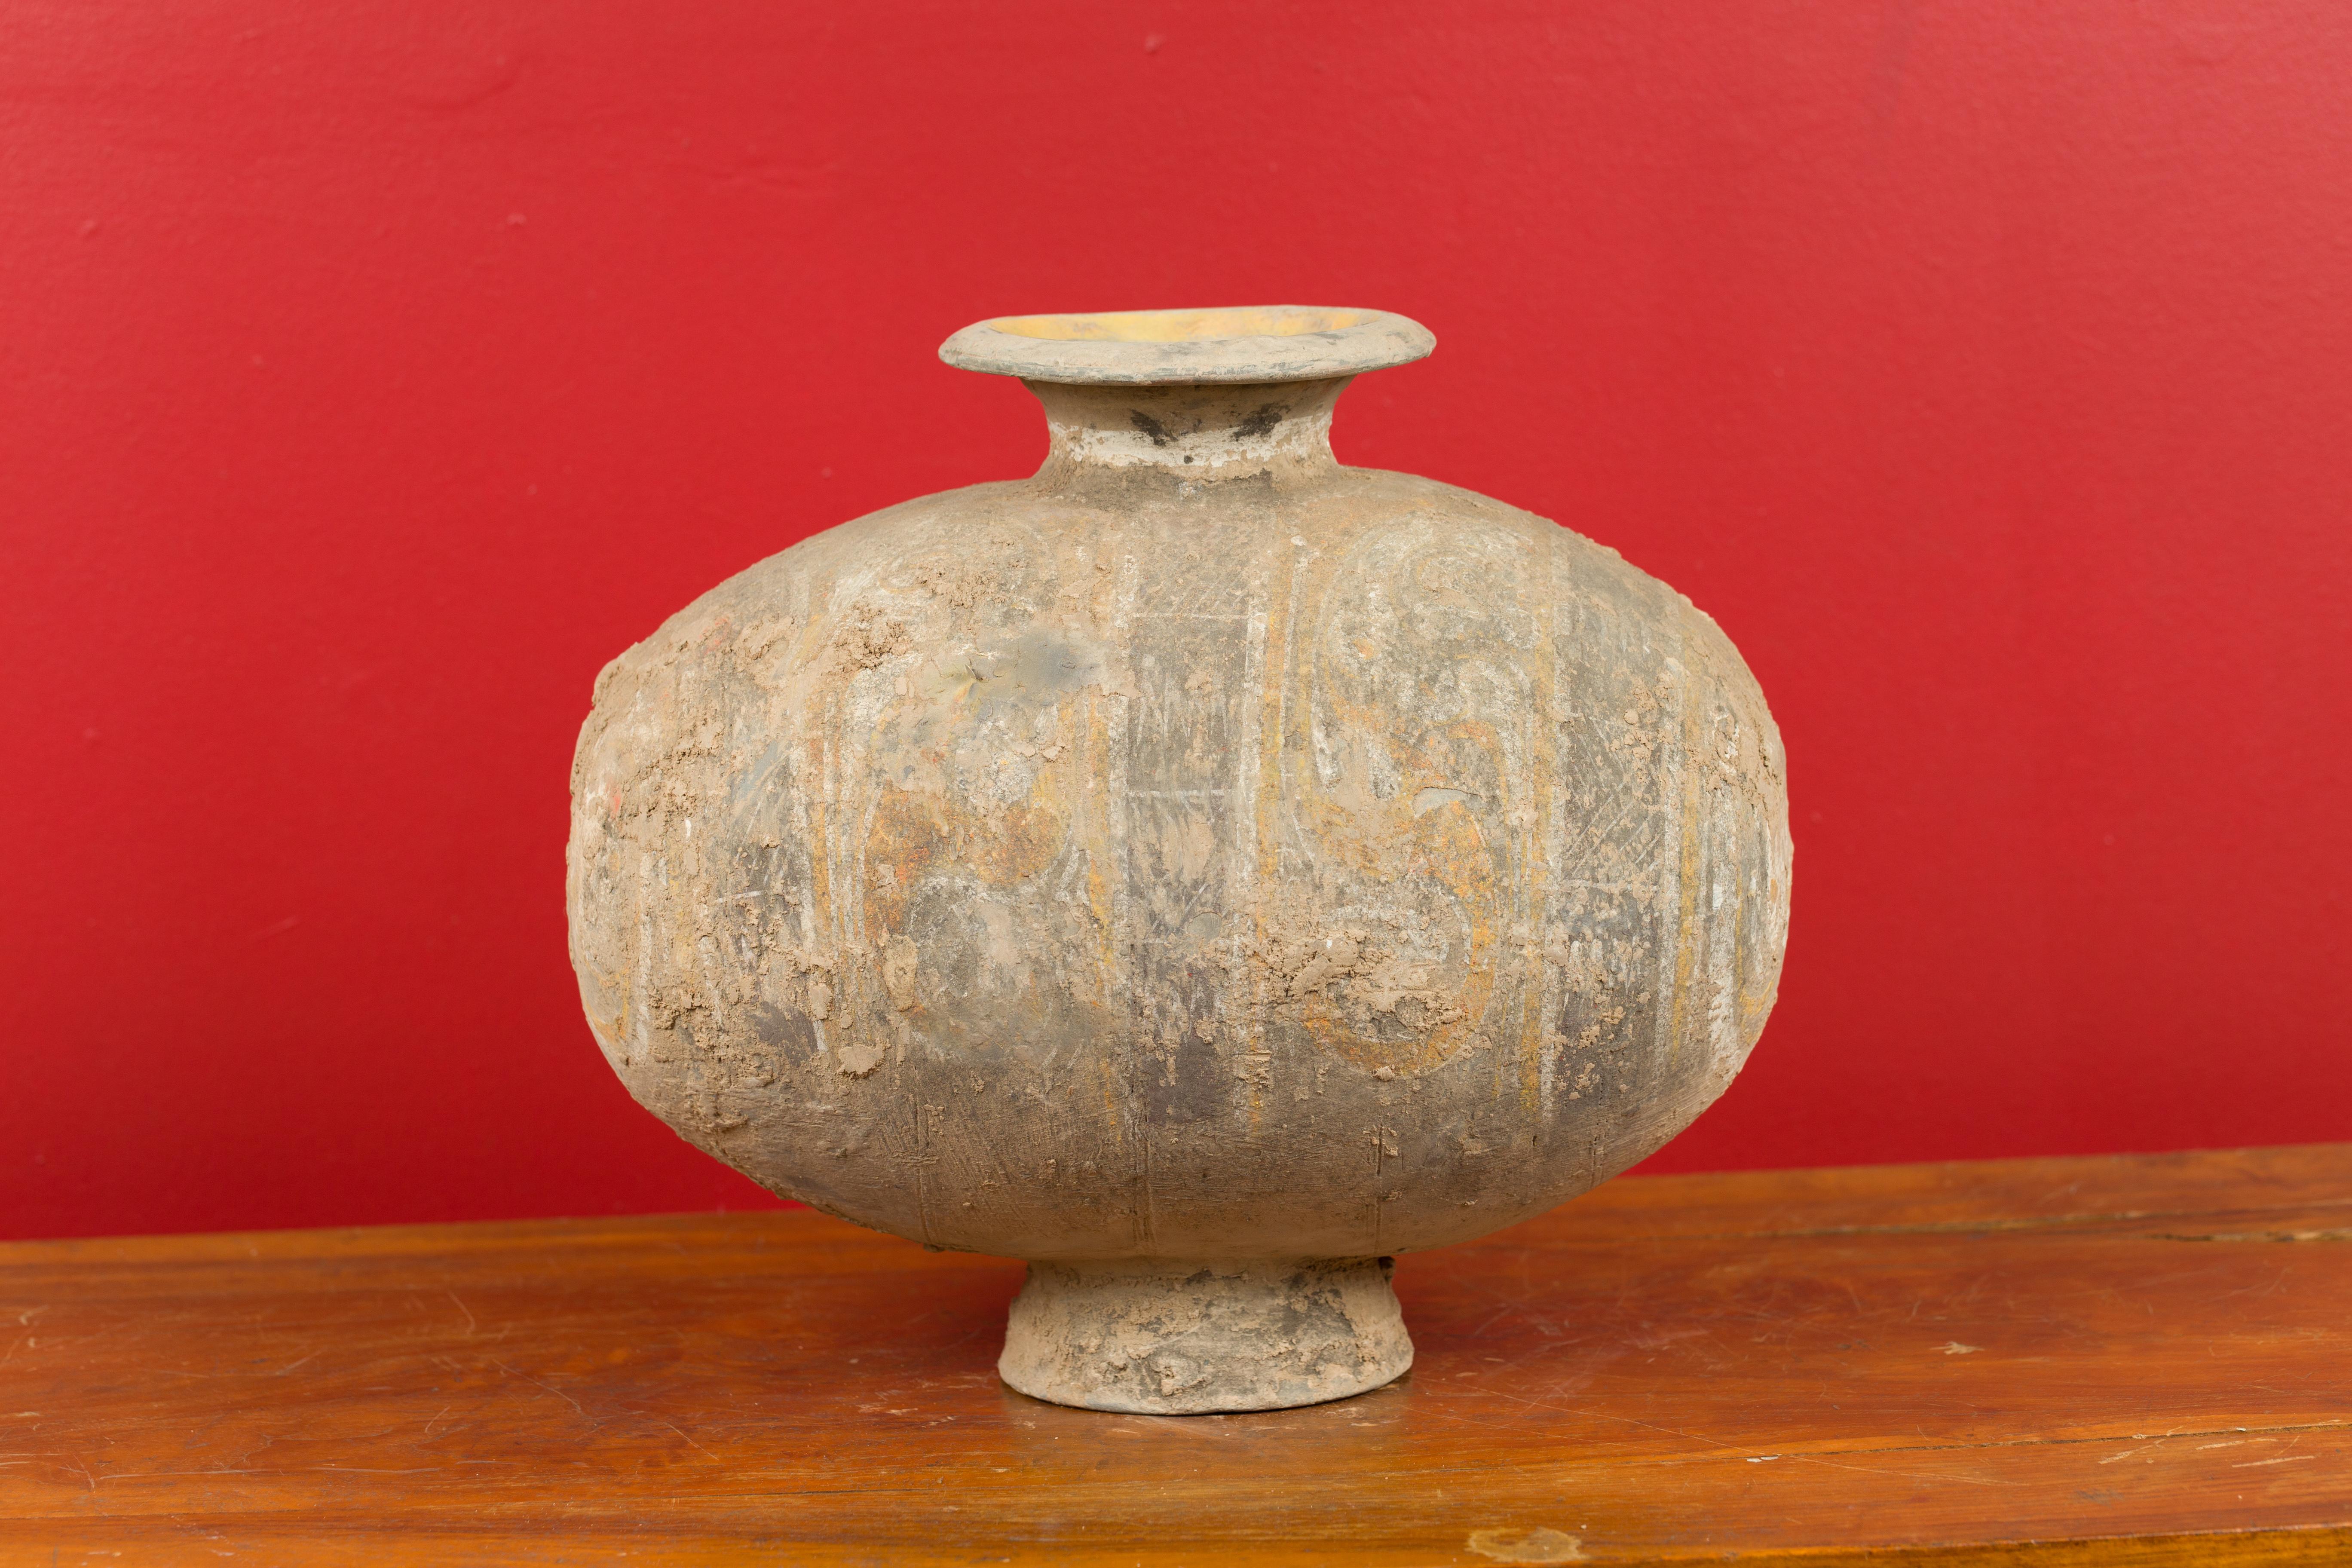 Chinese 206 BC-200 AD Han Dynasty Antique Terracotta Silk Cocoon Jar with Original Paint